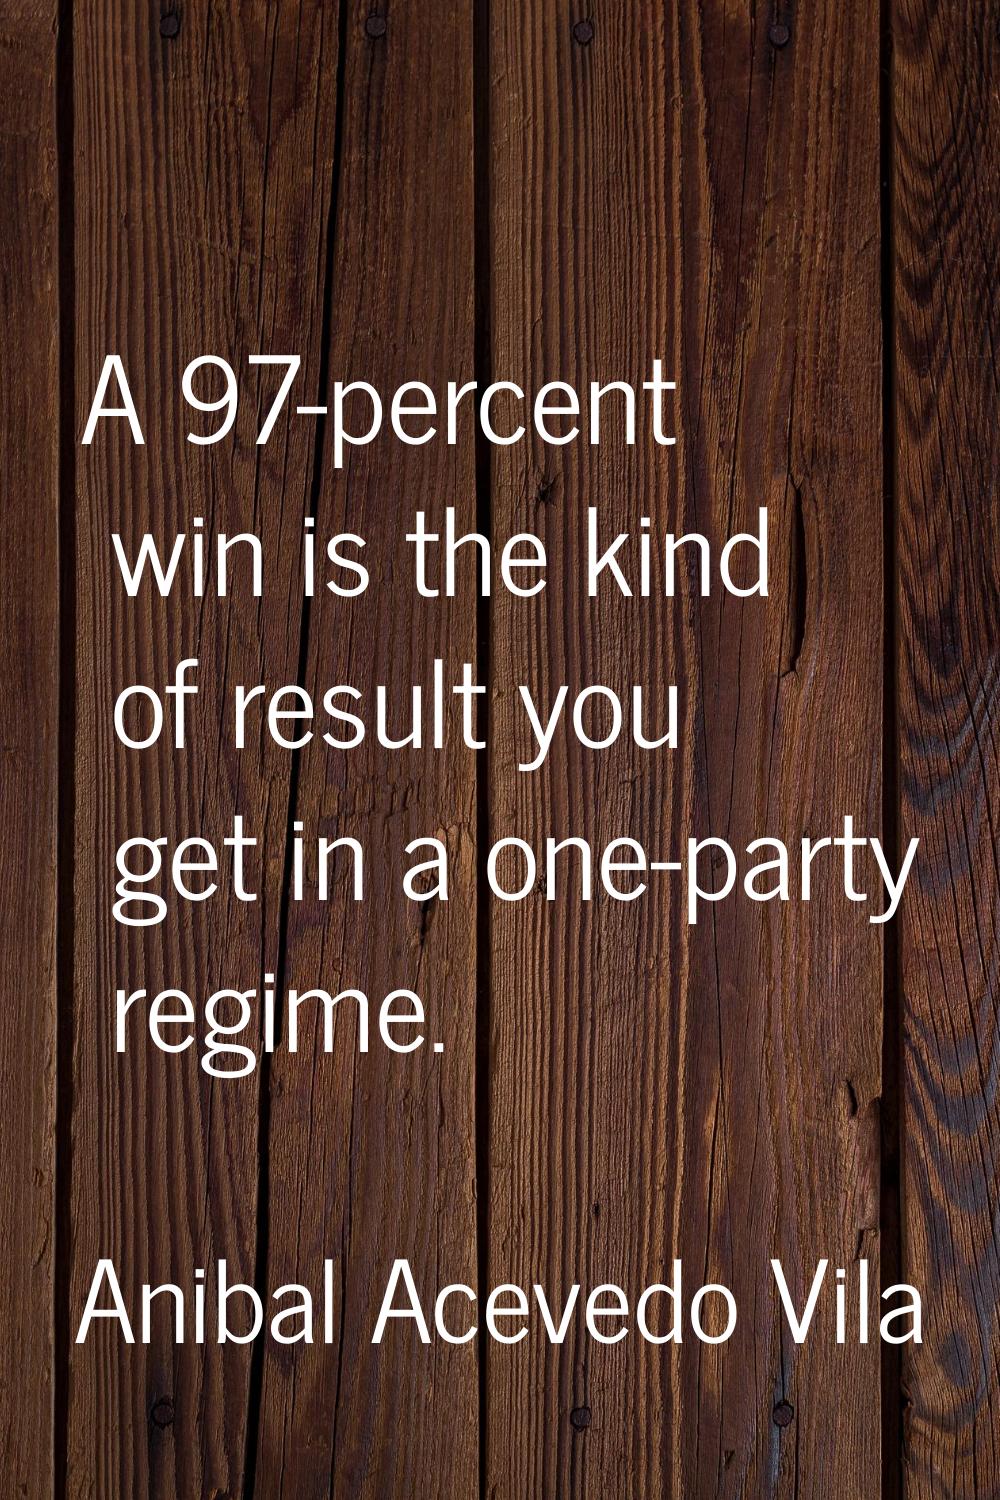 A 97-percent win is the kind of result you get in a one-party regime.